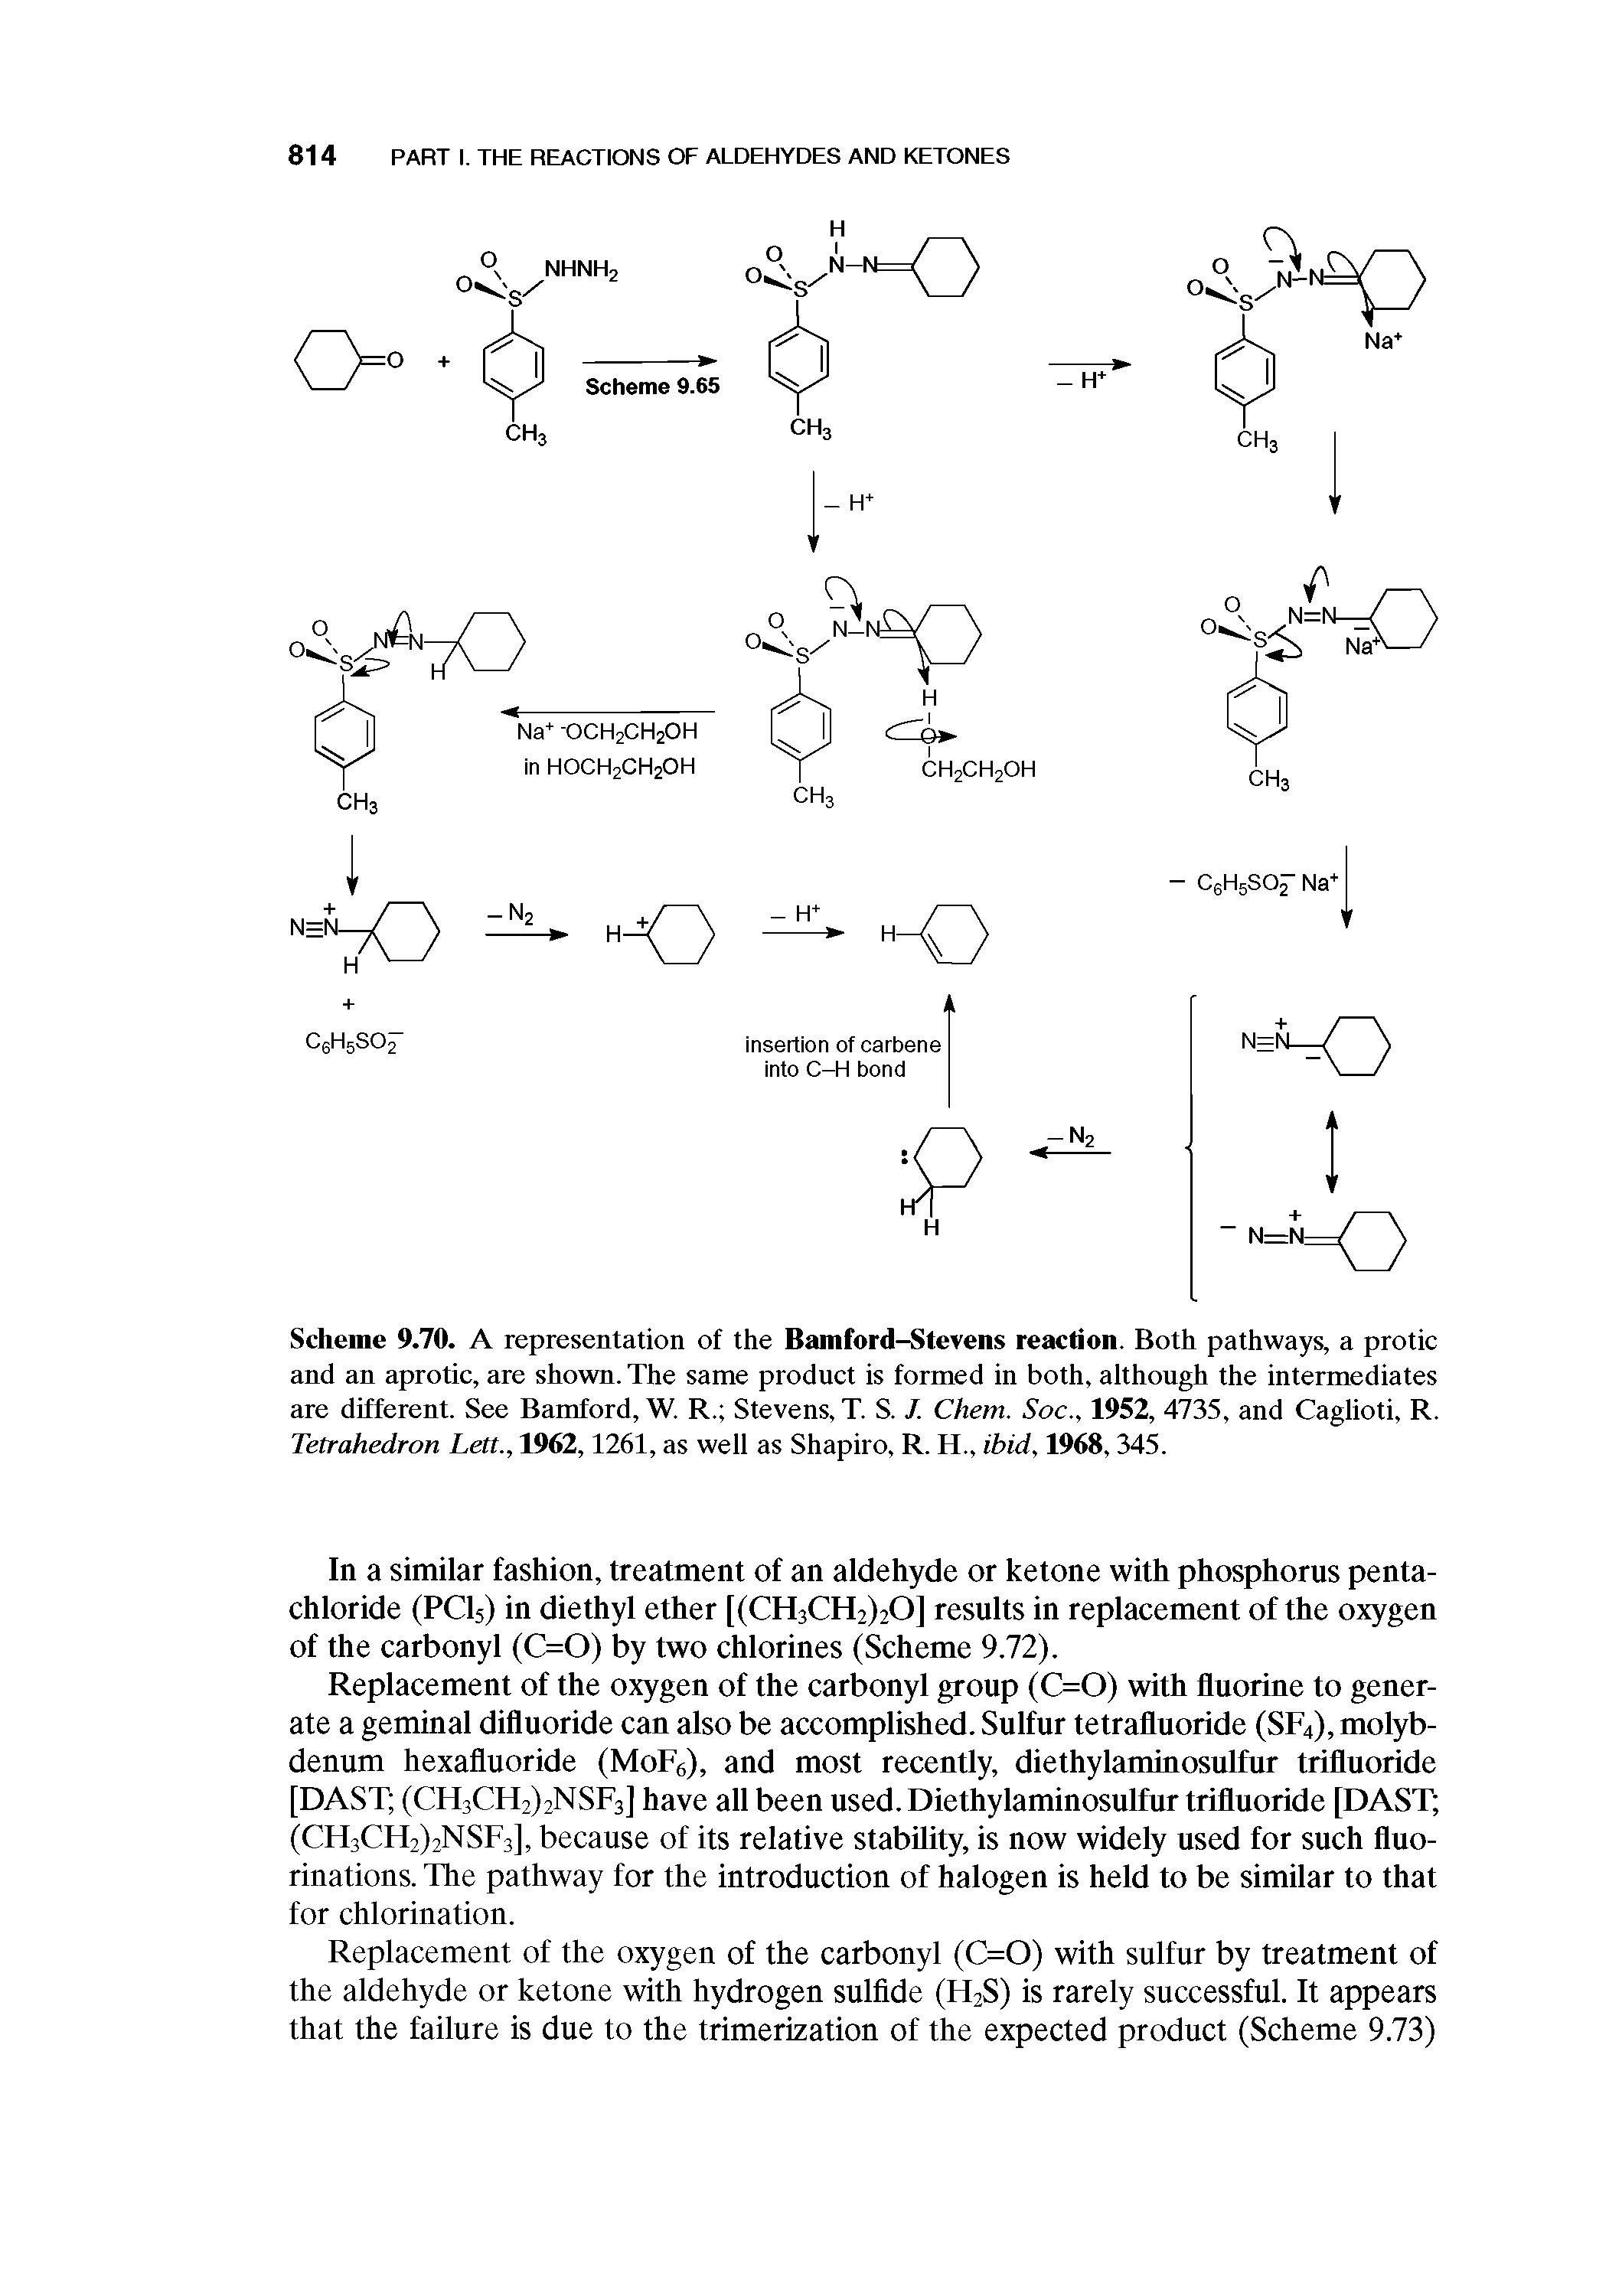 Scheme 9.70. A representation of the Bamford-Stevens reaction. Both pathways, a protic and an aprotic, are shown. The same product is formed in both, althongh the intermediates are different. See Bamford, W. R. Stevens, T. S. /. Chem. Soc., 1952, 4735, and Caglioti, R. Tetrahedron Lett., 1962,1261, as well as Shapiro, R. H., ibid, 1968,345.